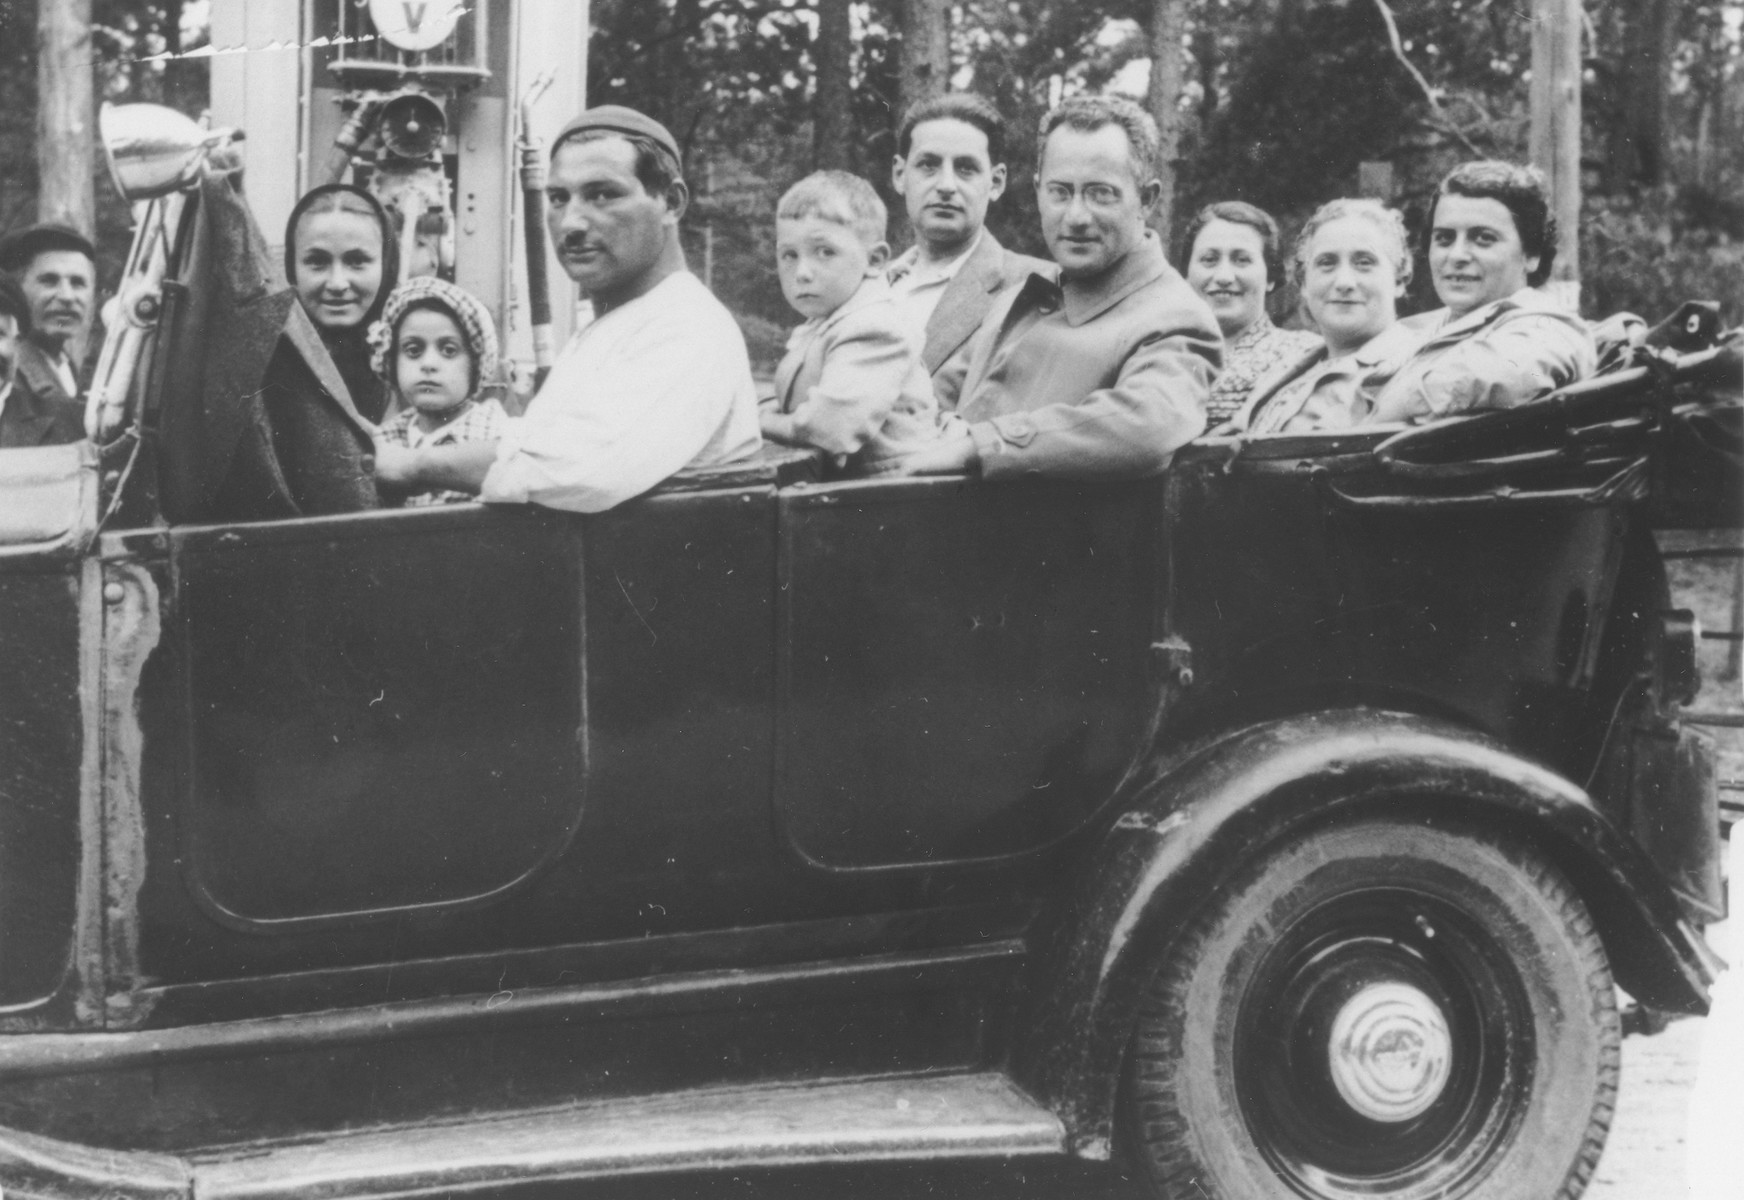 The Berkowicz and Eisenberg families go for a car ride while on vacation in Druskieniki, Poland.

Pictured from left to right are Anka (Basia's nanny), Basia Berkowicz, the driver, Amnon Eisenberg, Josef Pentelka, Chaim Ber Berkovicz, Rachela (Berkowicz) Pentelka , Sonia (Berkowicz) Eisenberg and Bina Berkowicz.